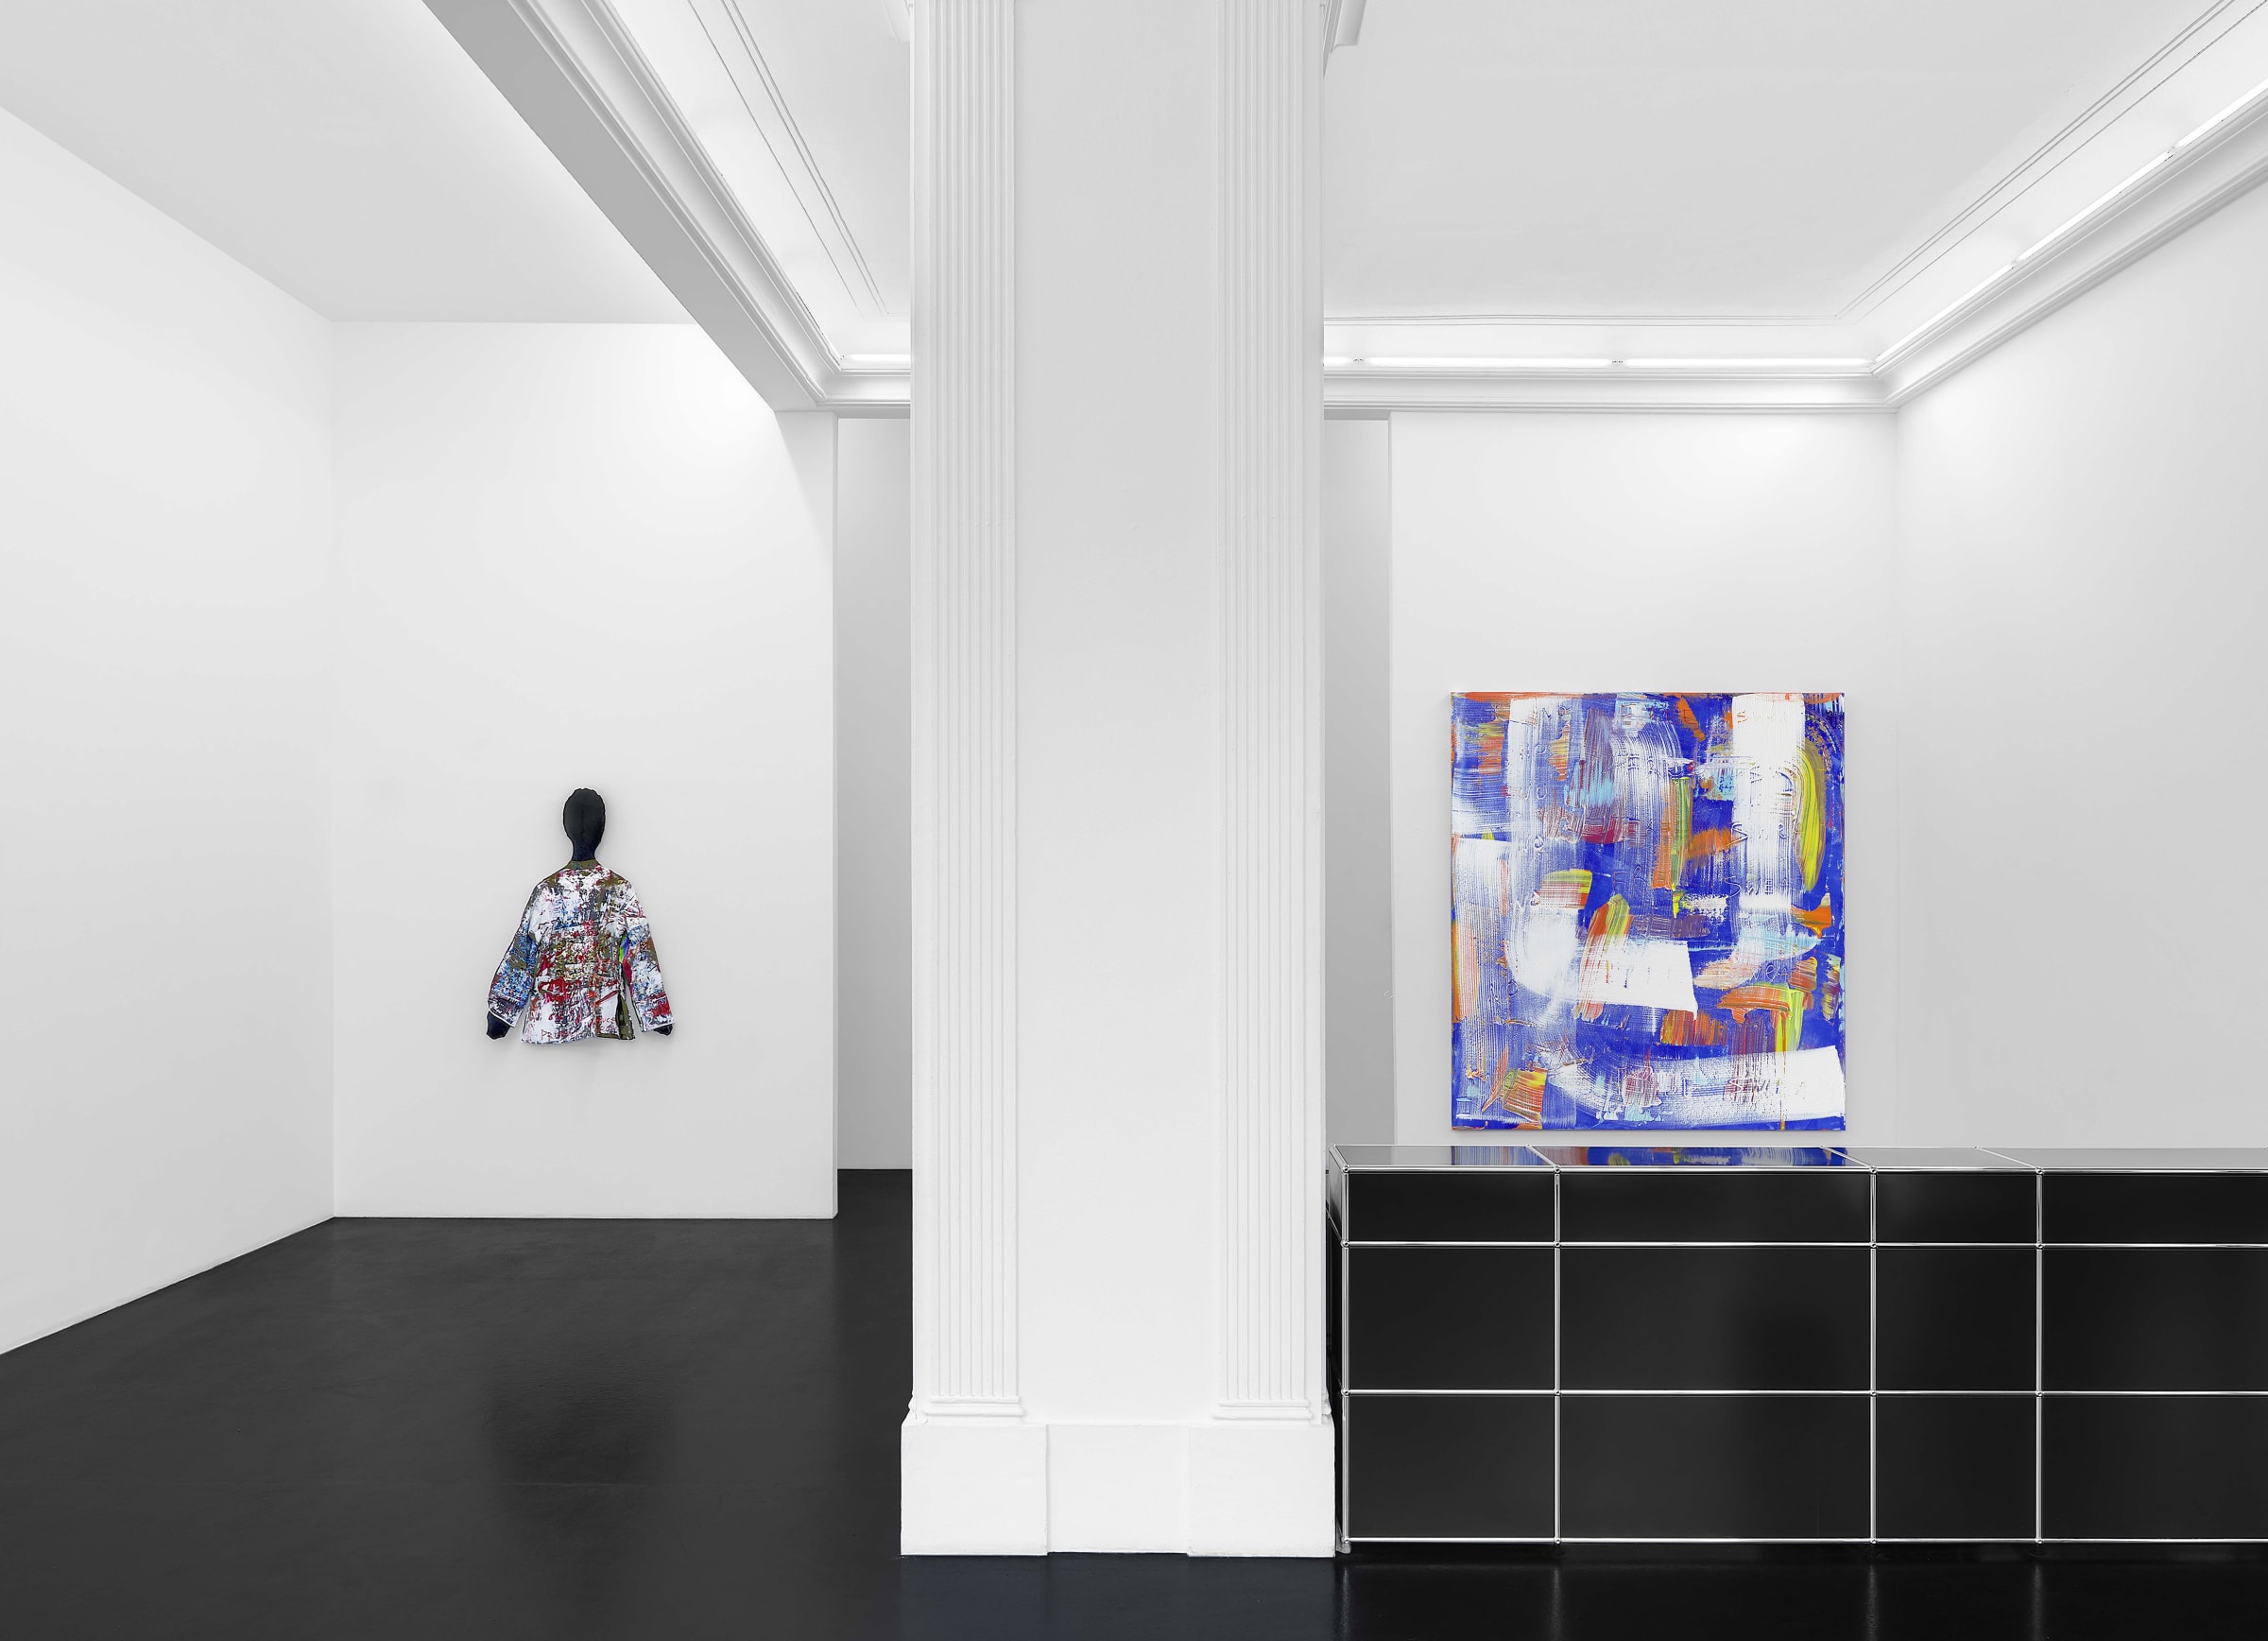 Richard KENNEDY STREET PROPHECY Installation View May 7 – June 12, 2020 Peres Projects, Berlin Photographed by: Matthias Kolb